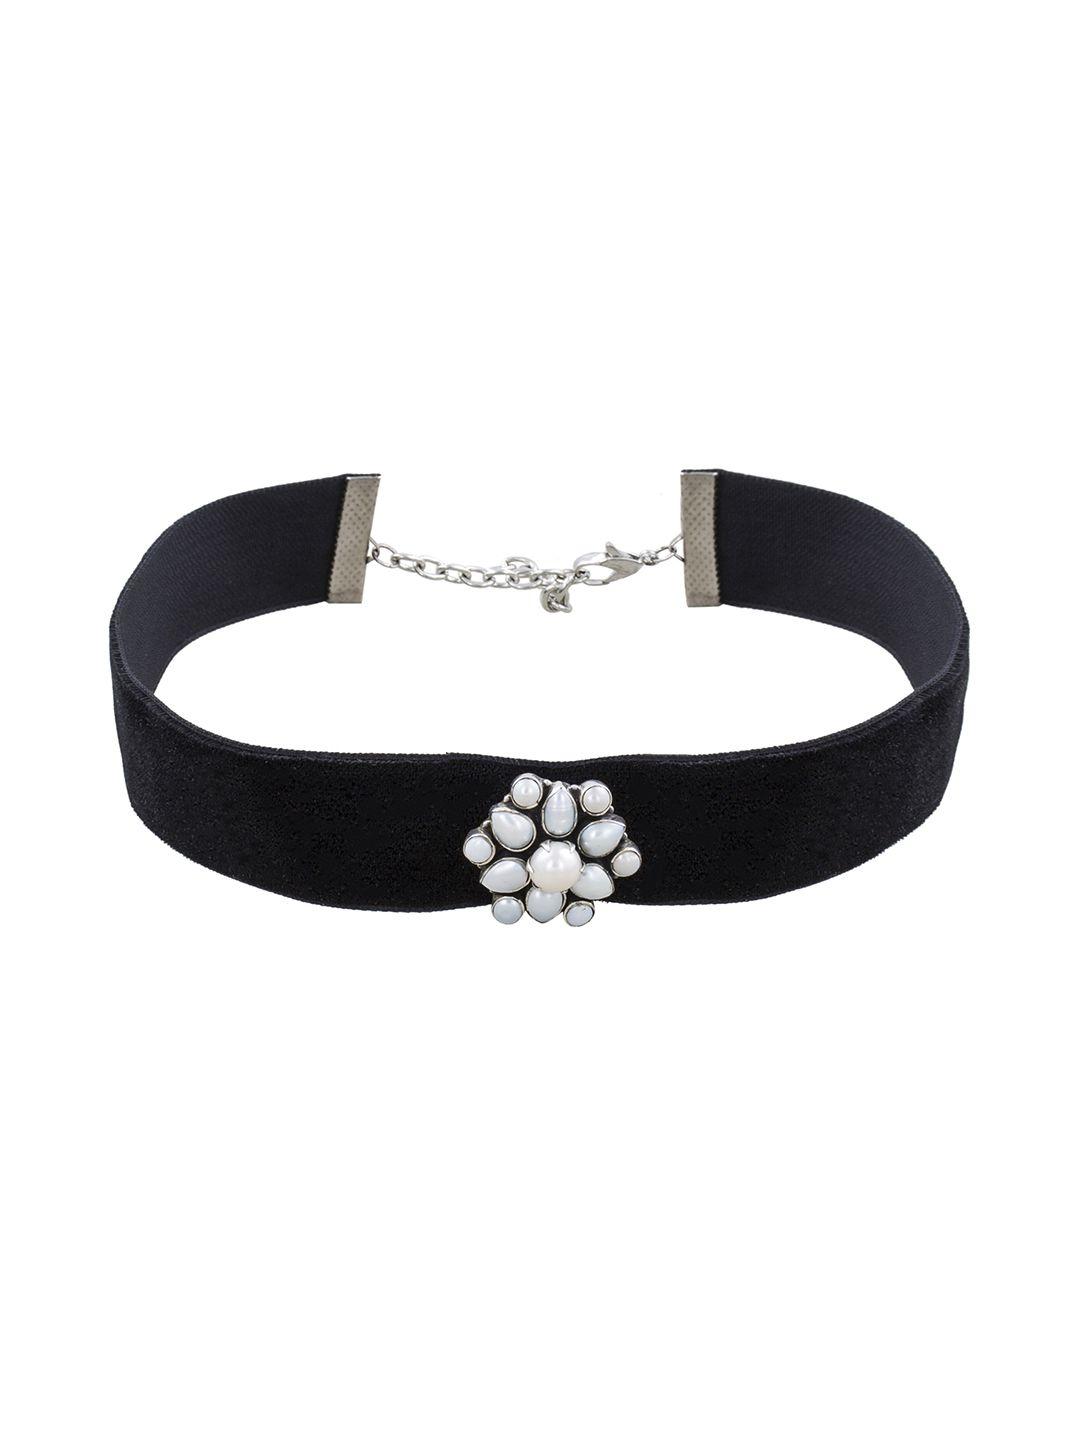 ahilya black choker necklace with pearl studded sterling silver centrepiece